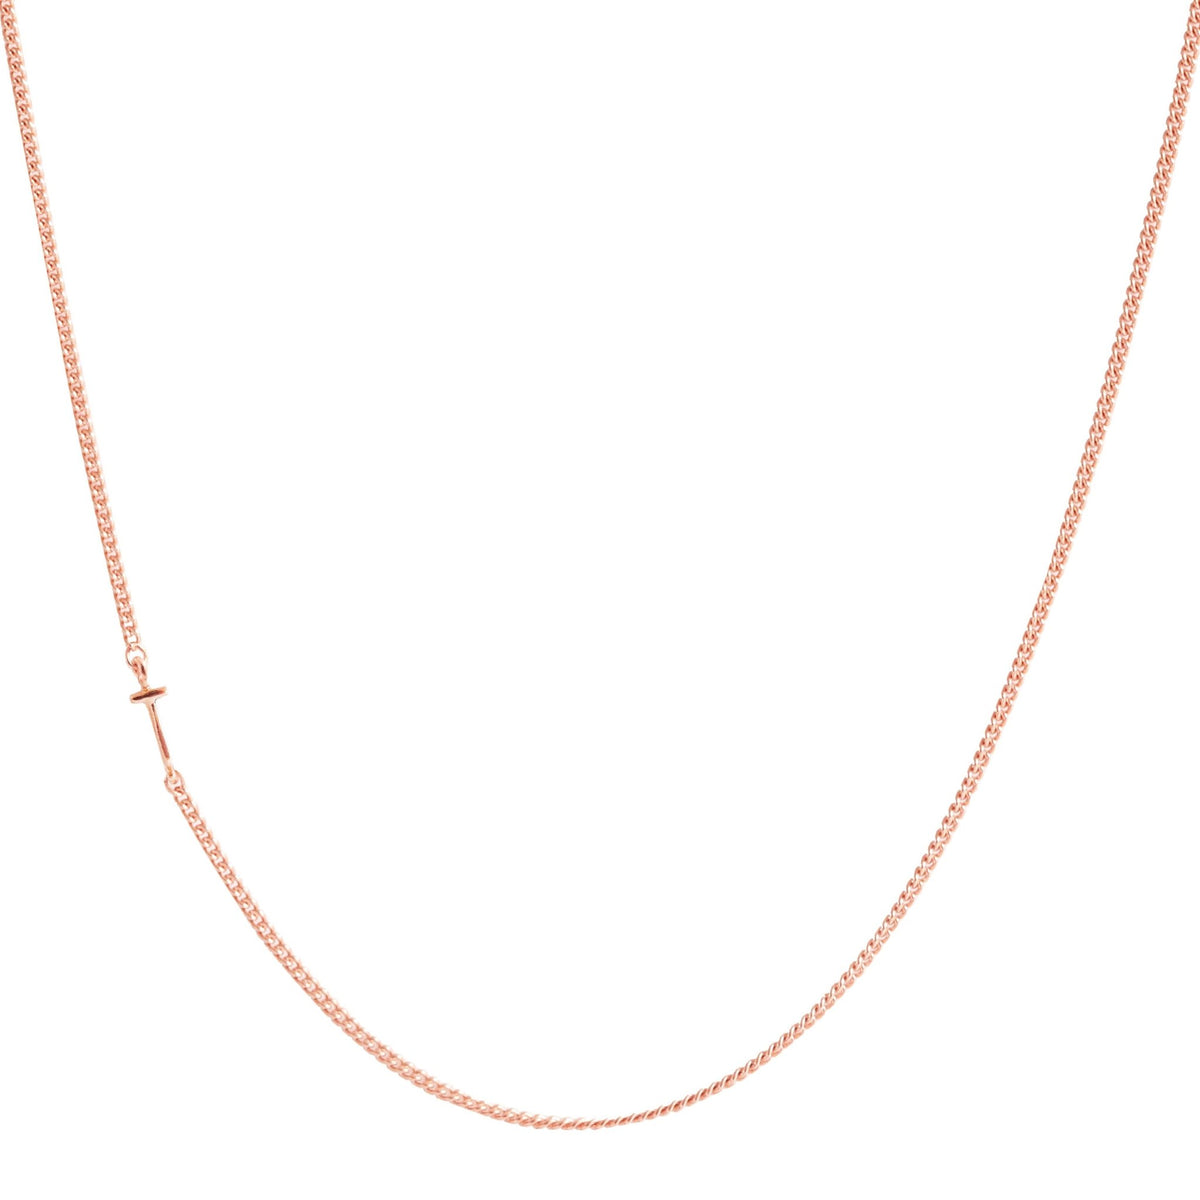 NOTABLE OFFSET INITIAL NECKLACE - T - GOLD, ROSE GOLD, OR SILVER - SO PRETTY CARA COTTER